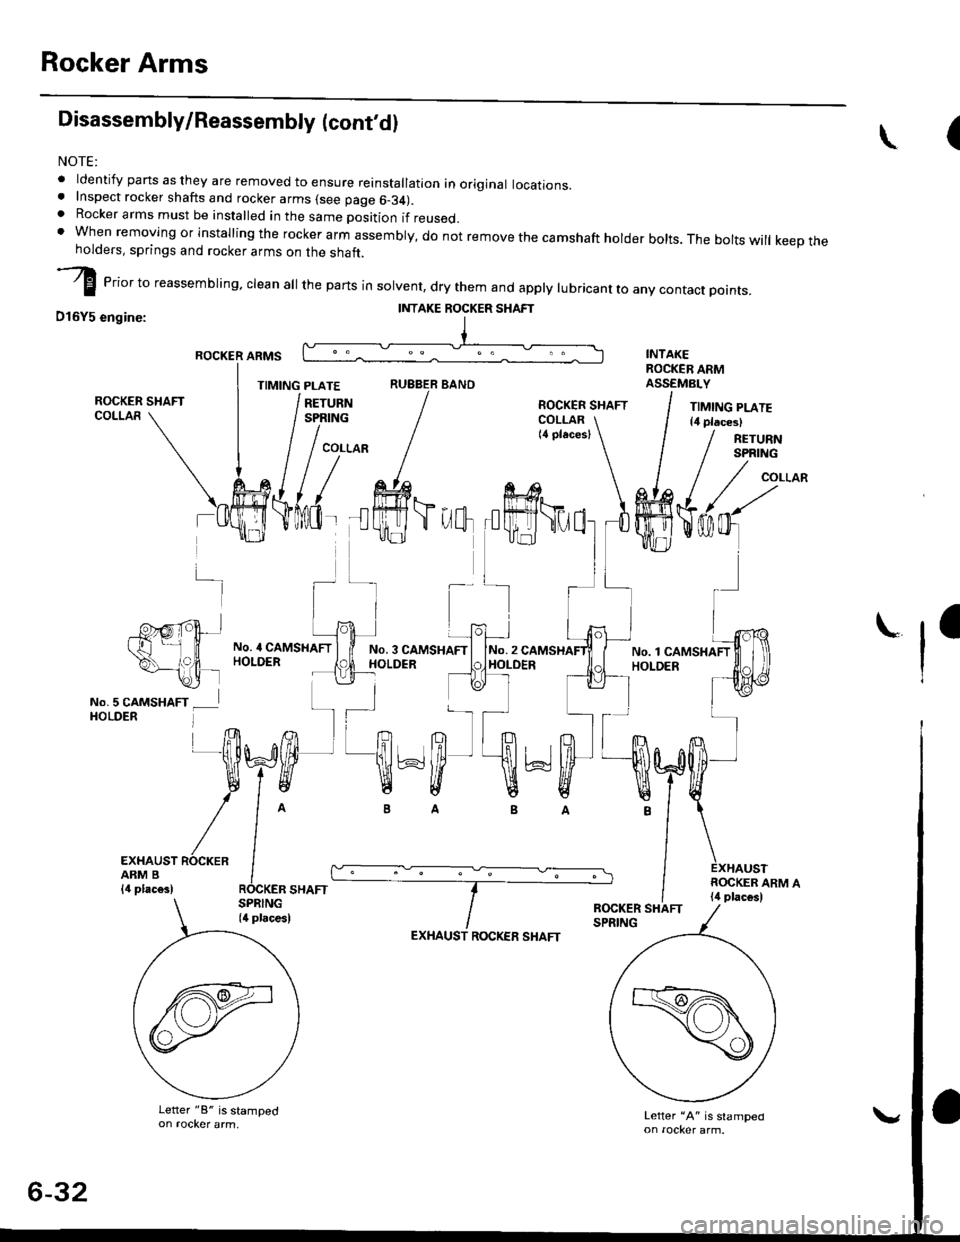 HONDA CIVIC 1996 6.G Workshop Manual Rocker Arms
Disassembly/Reassembly (contdl
NOTE:
. ldentify pans as they are removed to ensure reinstallation in original locations.. Inspect rocker shafts and rocker arms (see page 6-34).. Rocker ar